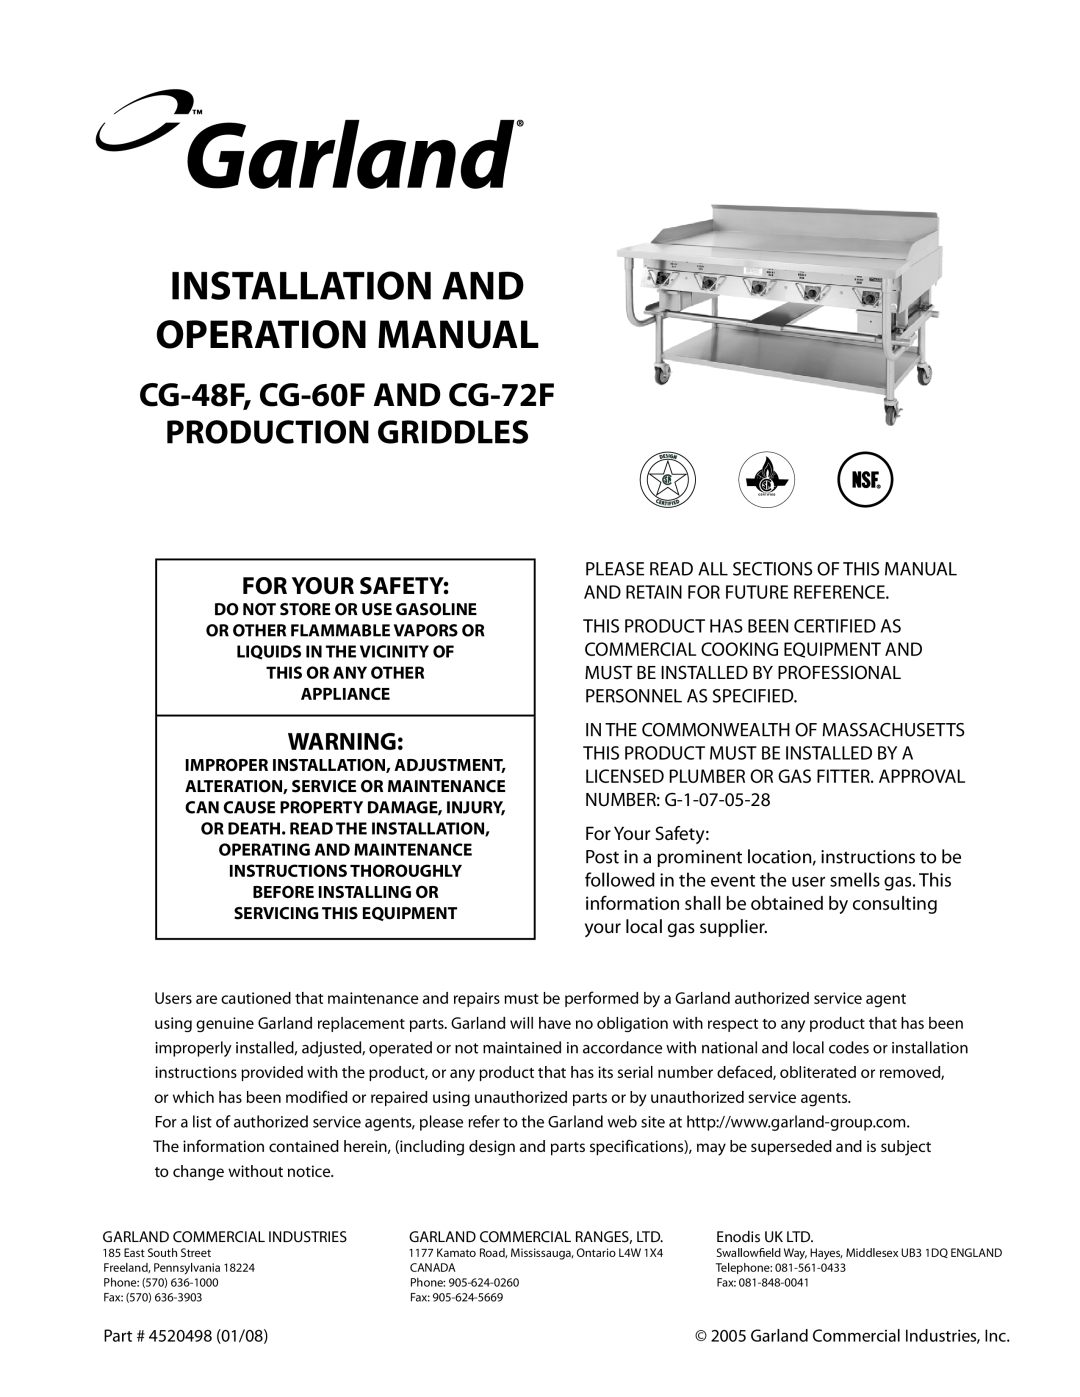 Garland operation manual CG-48F, CG-60F AND CG-72F PRODUCTION GRIDDLES, For Your Safety, This Or Any Other Appliance 